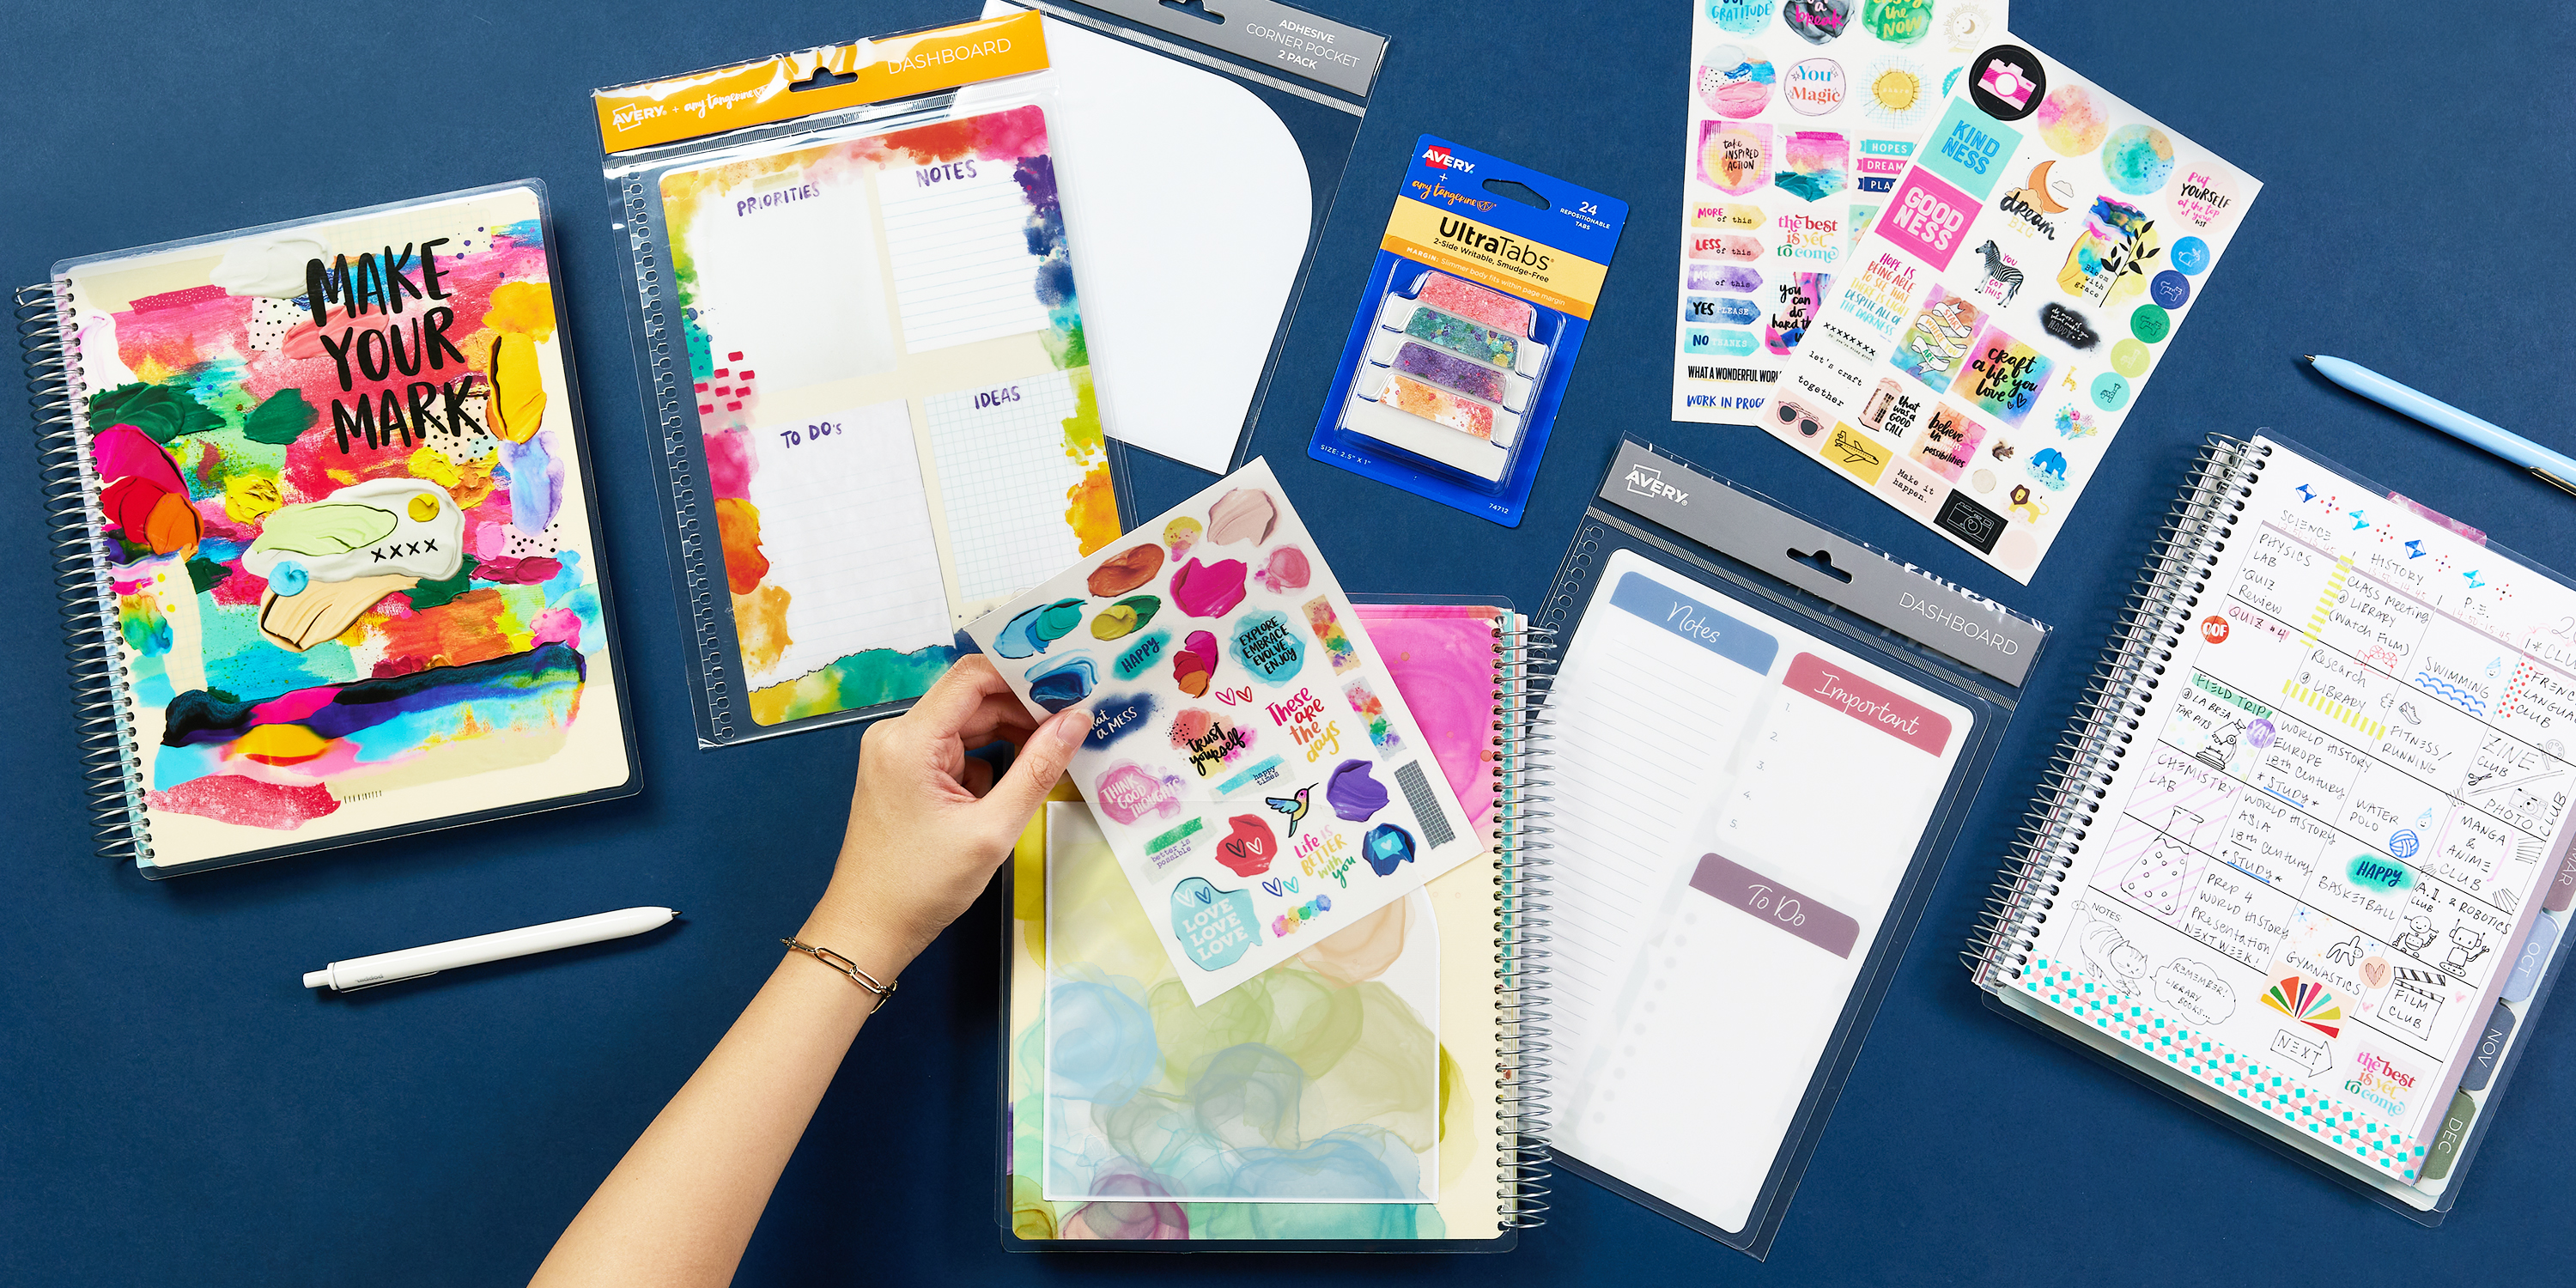 Avery planner accessories are shown spread out on a navy blue background. In addition to Avery academic planners, there are dashboards, planner stickers, Ultra Tabs, and adhesive pockets.